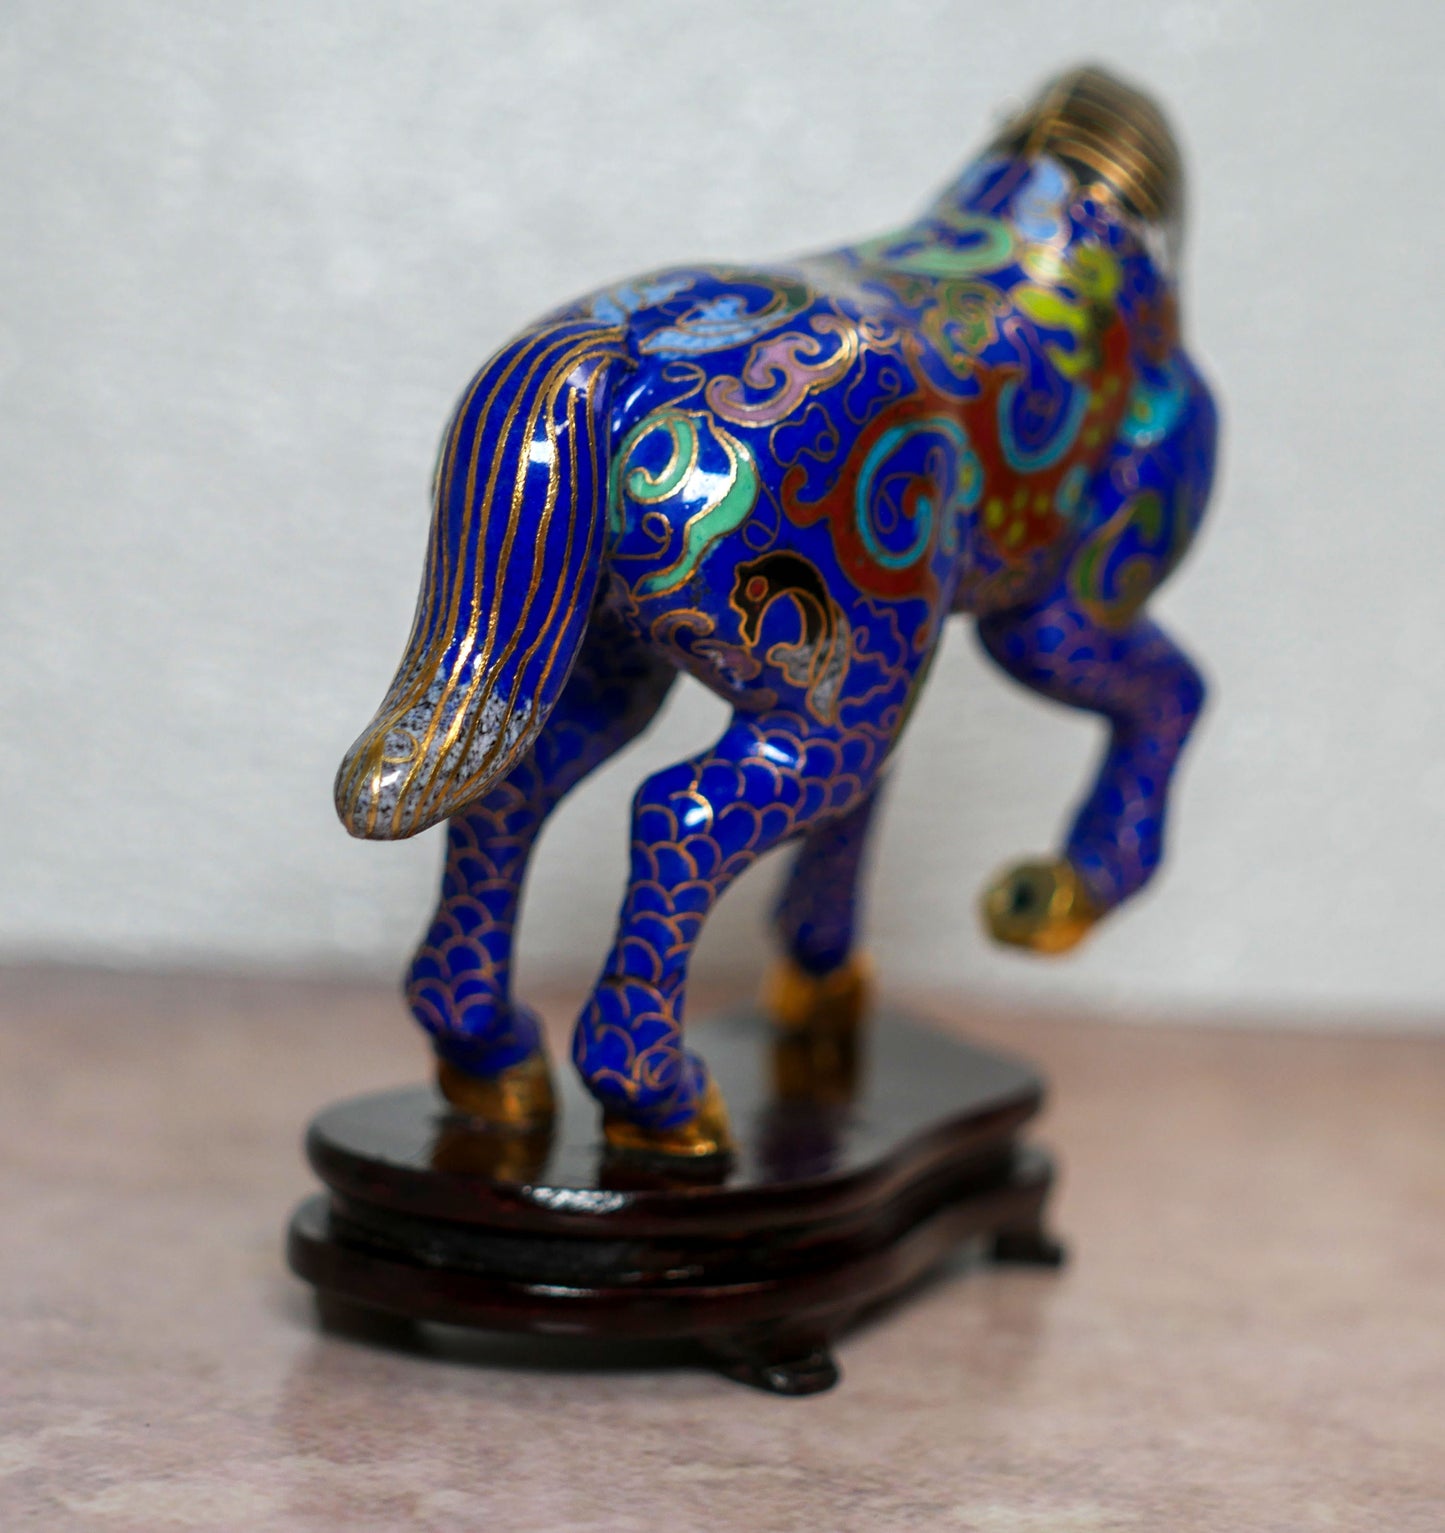 Vintage Chinese Cloisonné Horse Figurine Statue Enameled Brass On Wooden Base - 5.5" Long